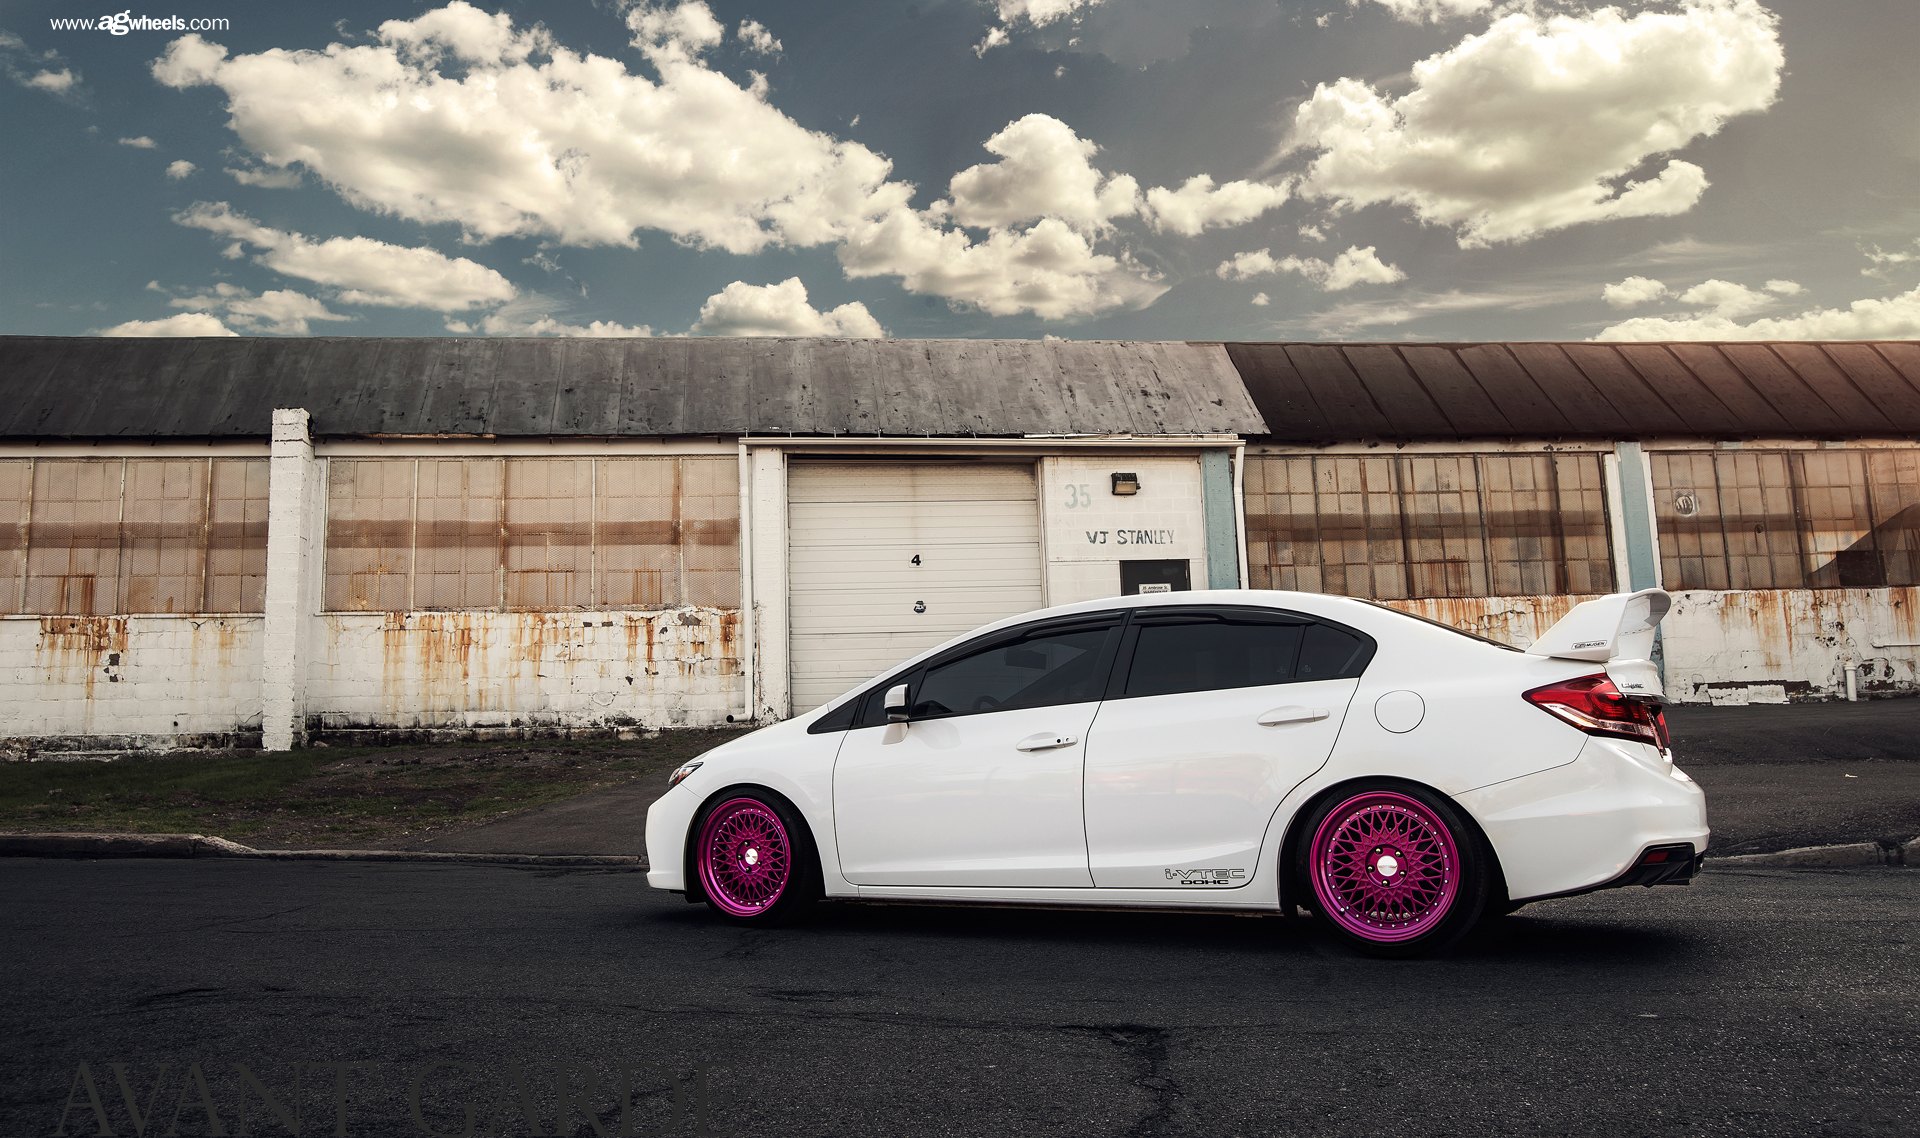 Aftermarket Rear Diffuser on White Honda Civic Si - Photo by Avant Garde Wheels